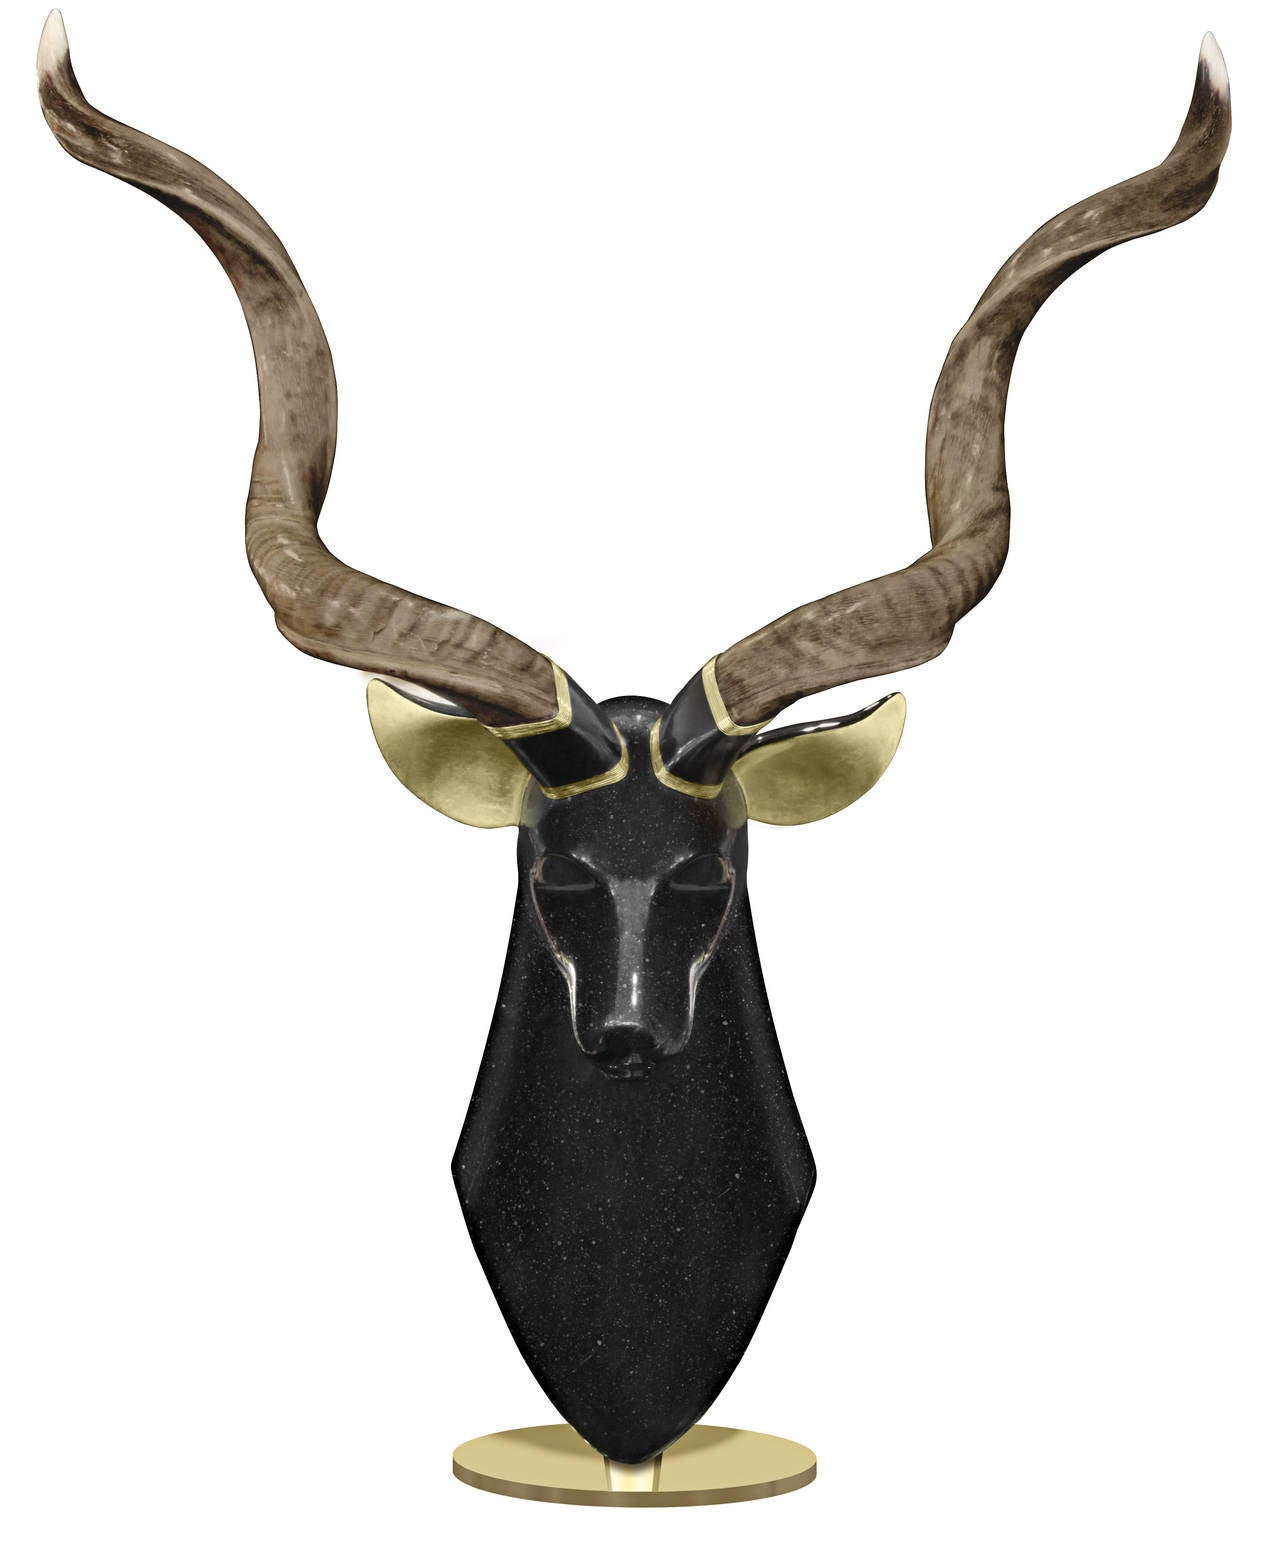 Large and impressive stag sculpture, head in iridescent gunmetal faux granite nitrocellulose lacquer over a fiberglass casting with solid brass base and authentic horns, by Roberto Estevez for Karl Springer, American, 1980s.

Roberto Estevez was